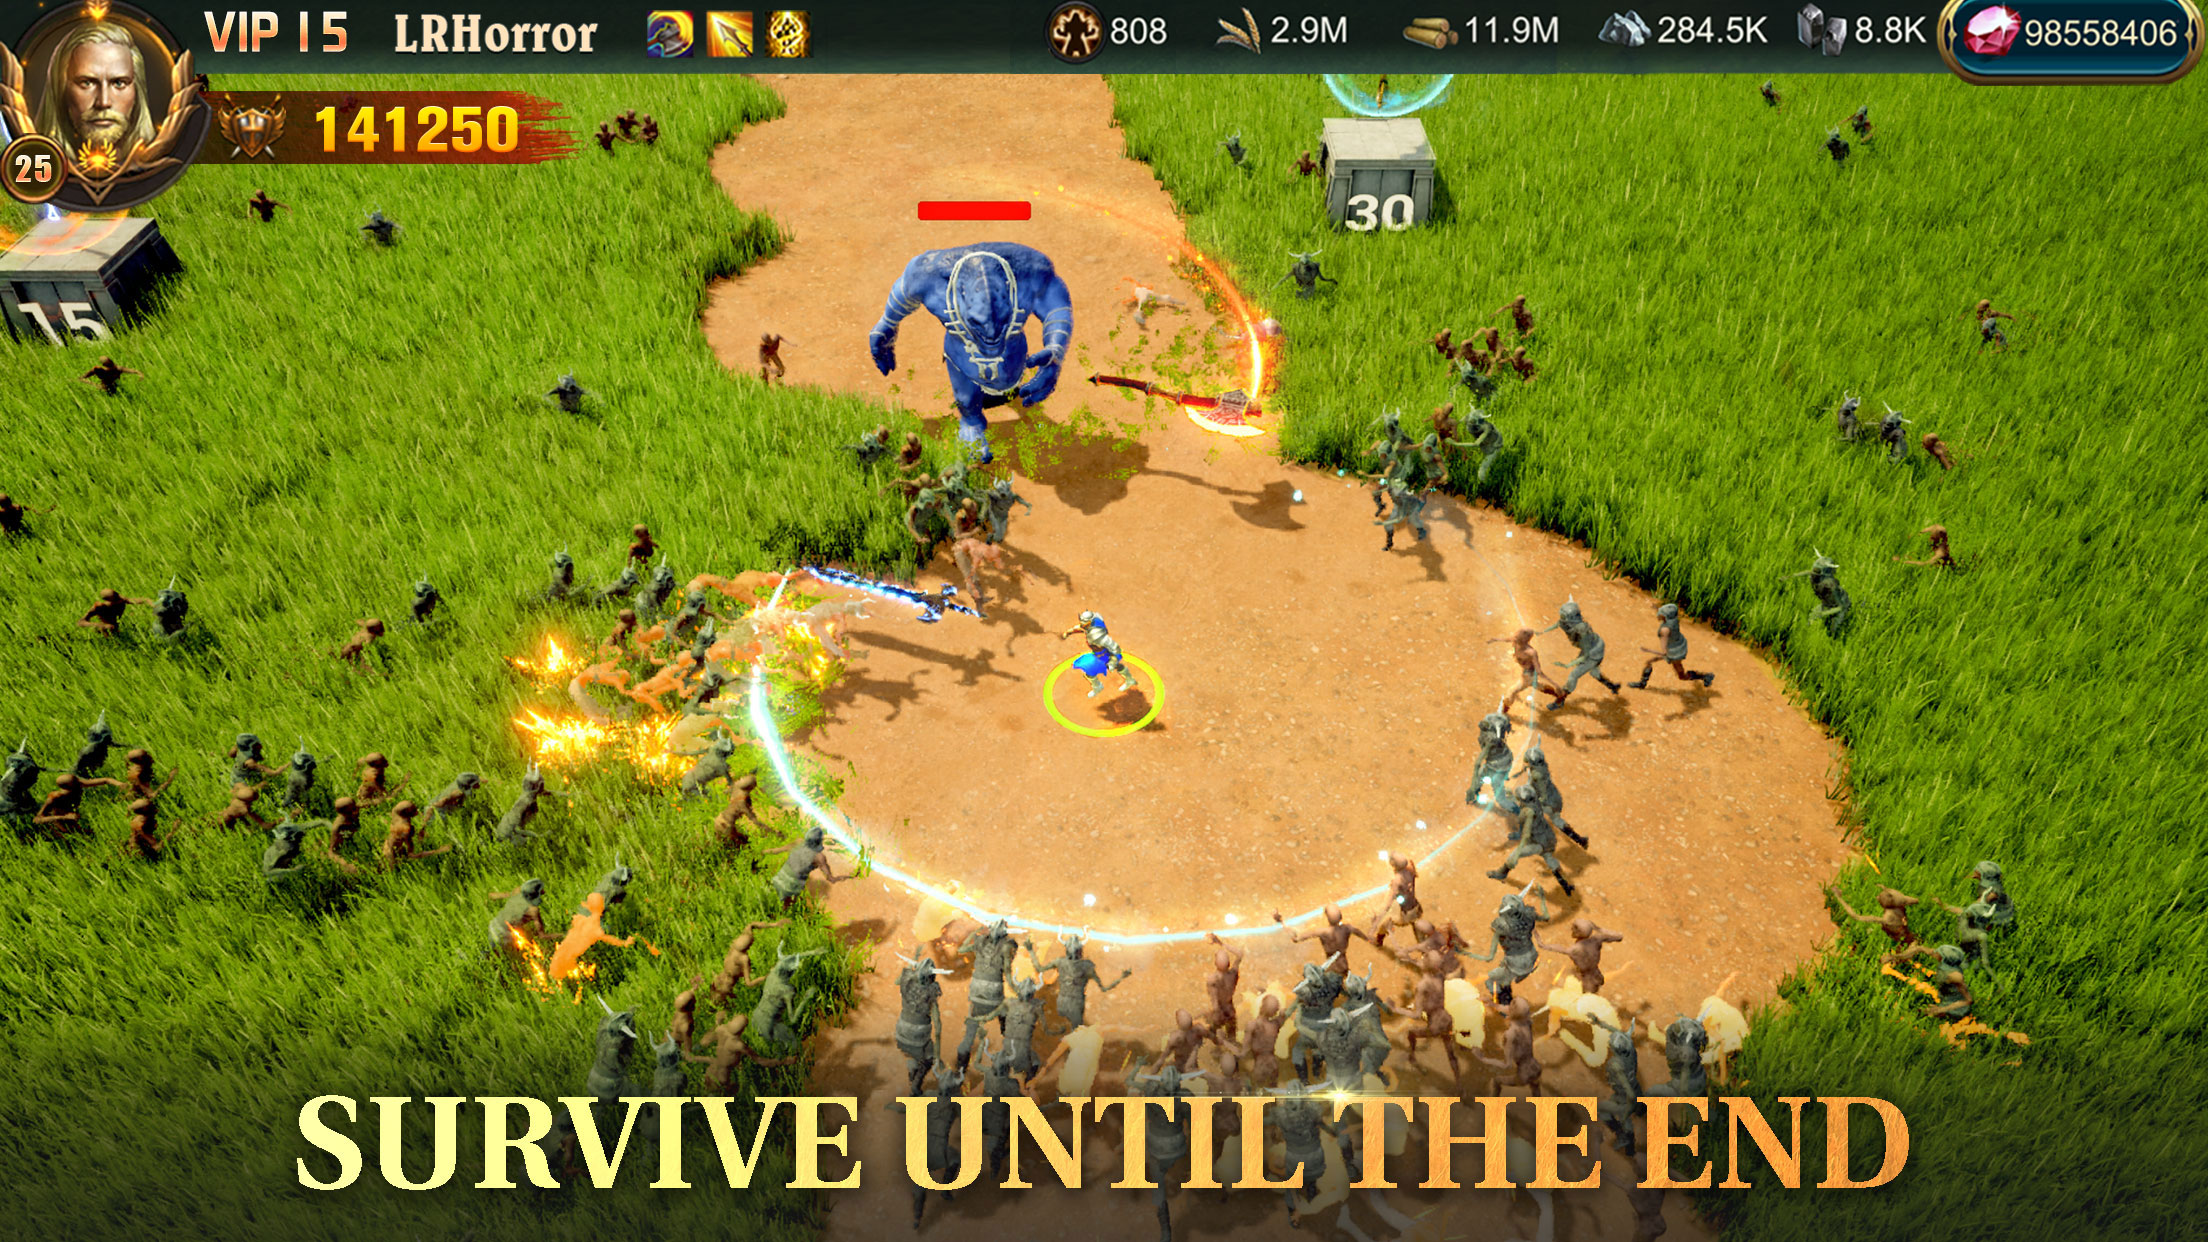 Play War and Order Online for Free on PC & Mobile